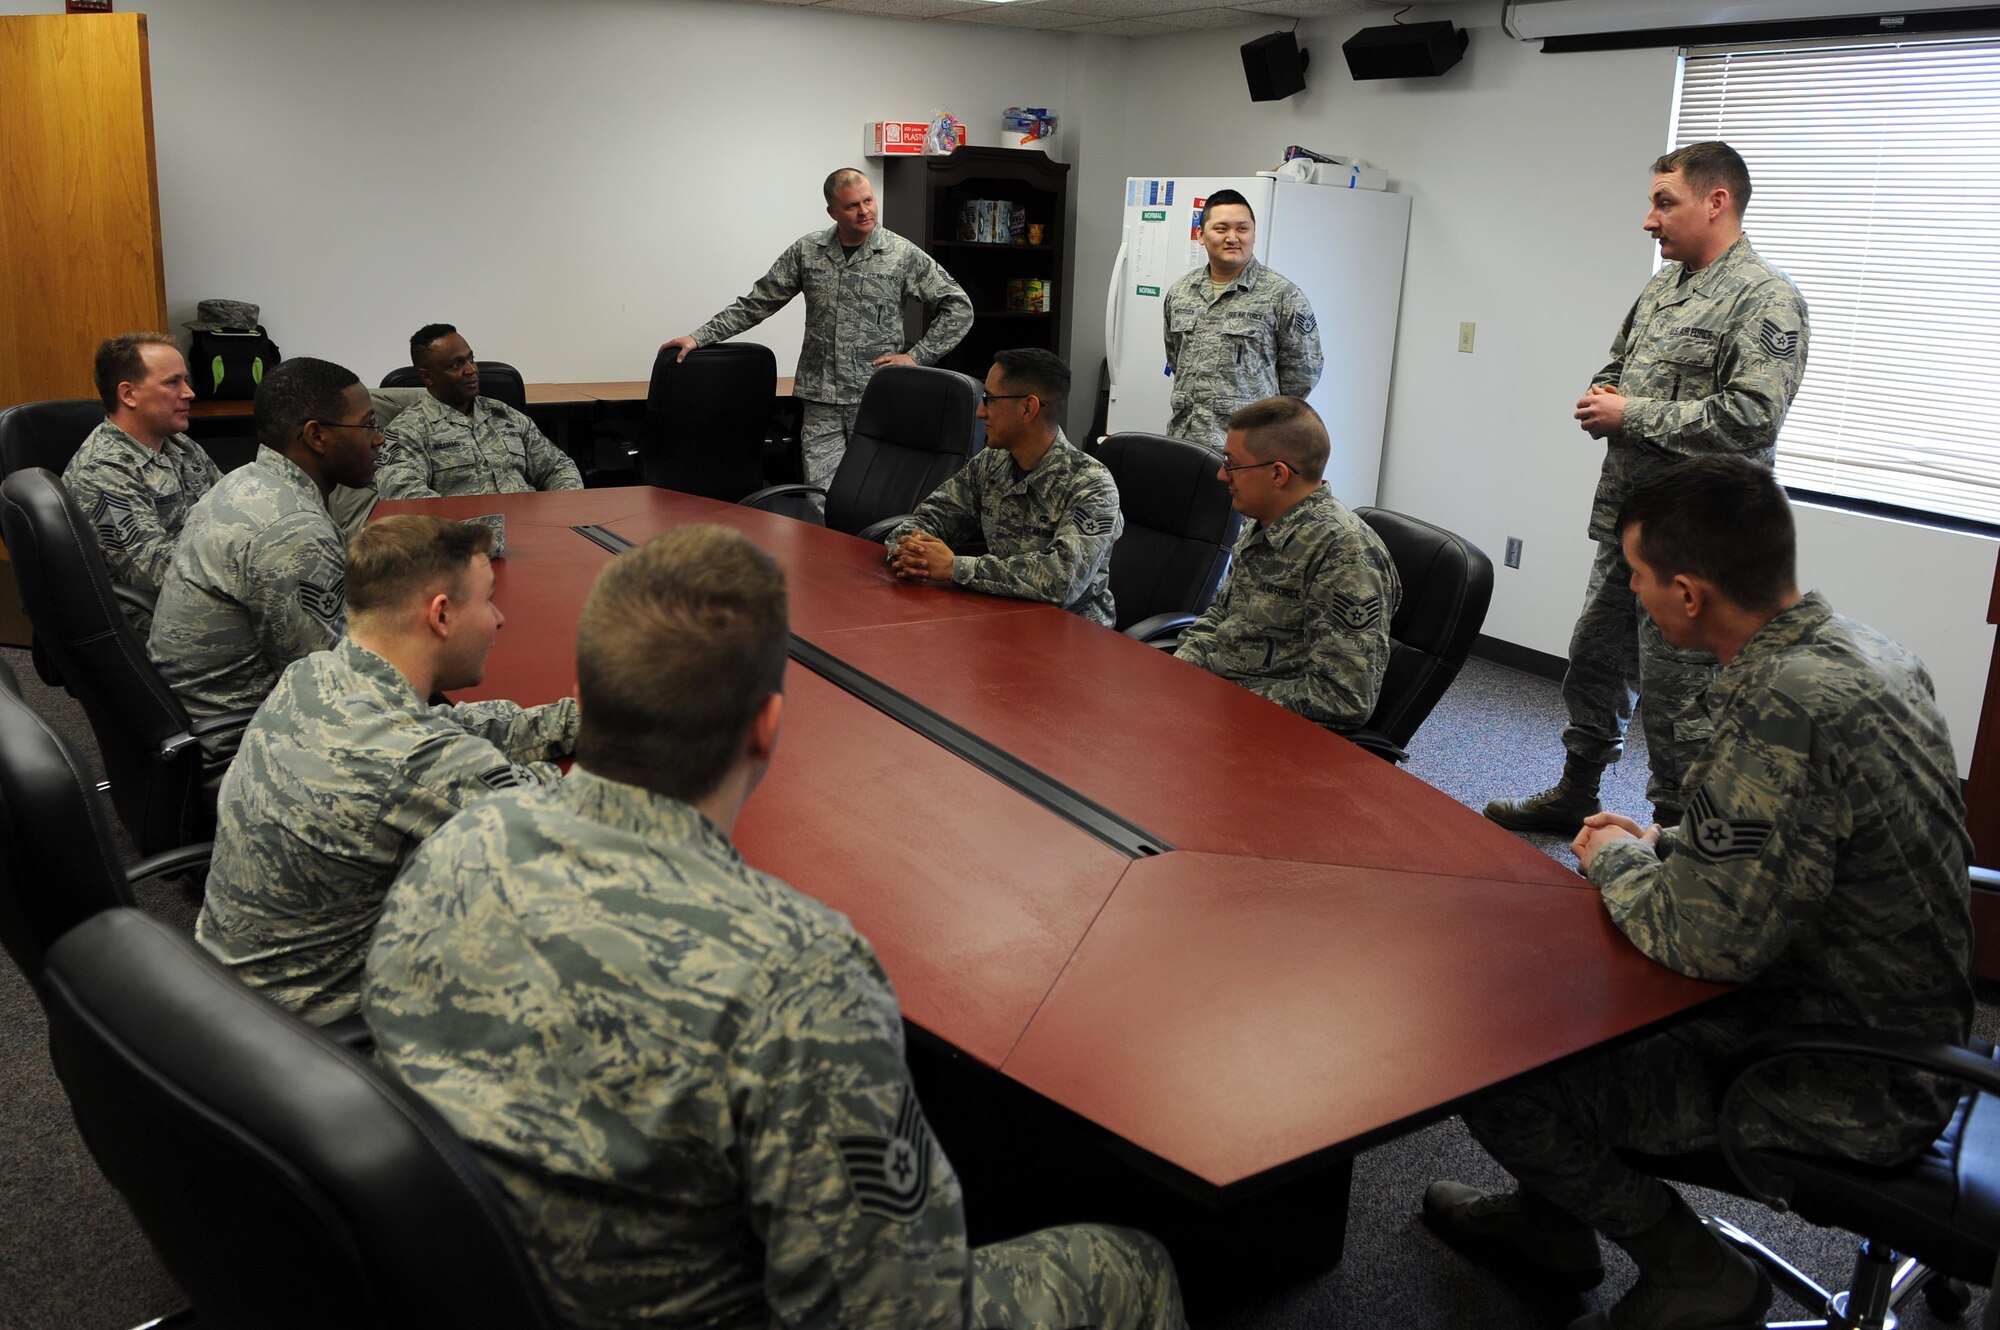 Chief Master Sgt. Calvin Williams, Air Force Global Strike command chief, listens to Airmen from base operations at Minot Air Force Base, N.D., March 9, 2017. Williams visited units and spoke about Air Force and AFGSC topics. (U.S. Air Force photo/Senior Airman Kristoffer Kaubisch)